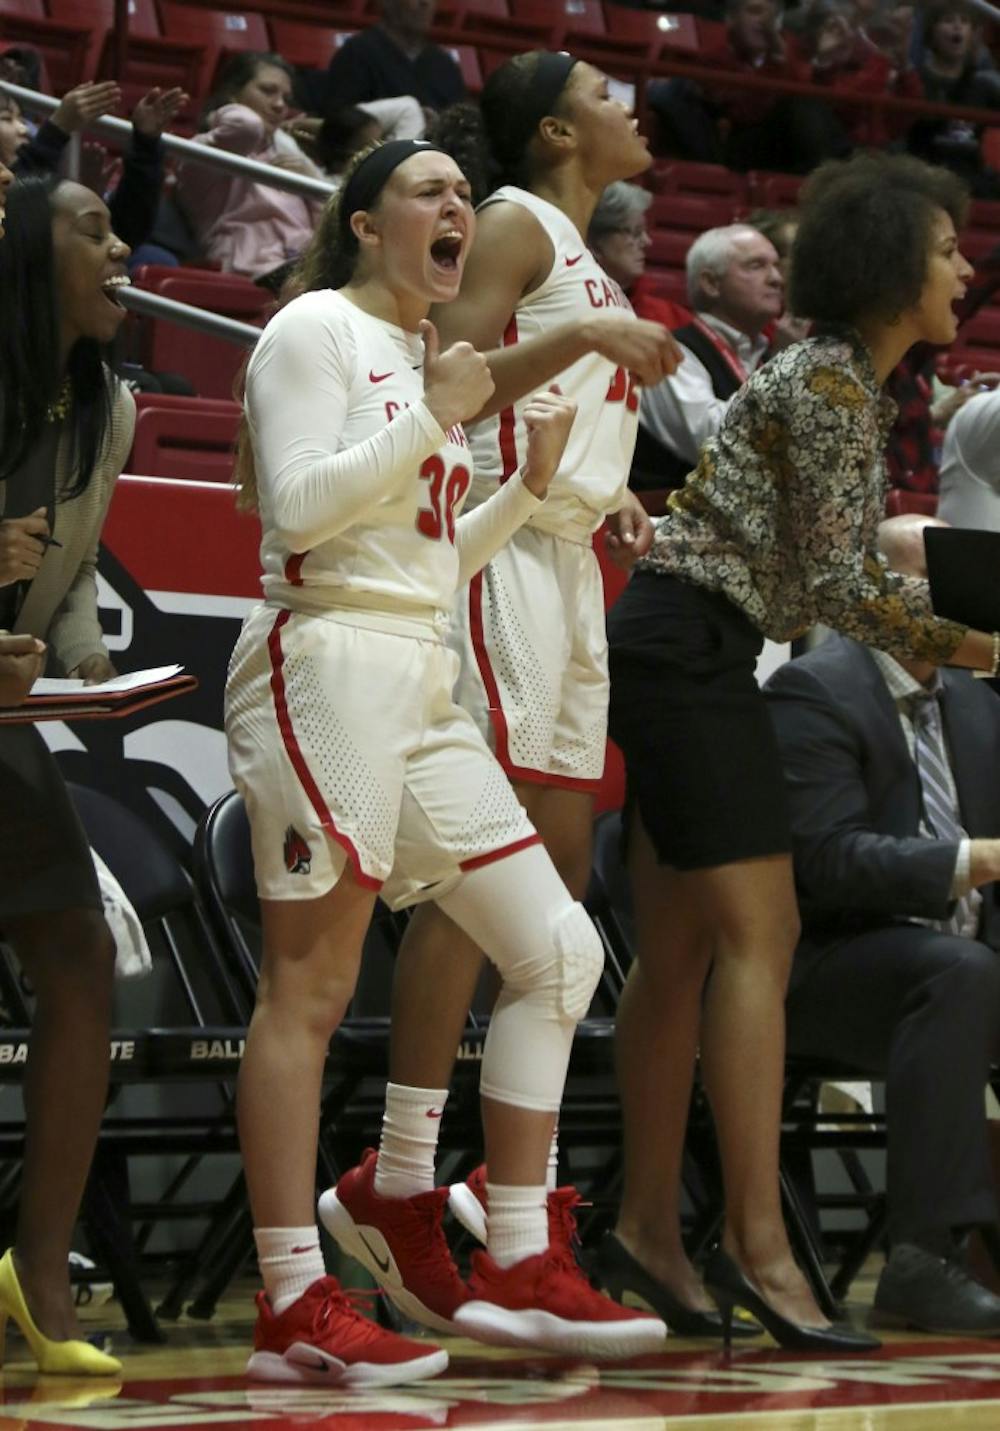 <p>Ball State freshman Anna Clephane celebrates a 3-pointer by senior Jasmin Samz against Cleveland State Nov. 11, 2018, in John E. Worthen Arena. Ball State won 67-62. <strong>Paige Grider, DN</strong></p>